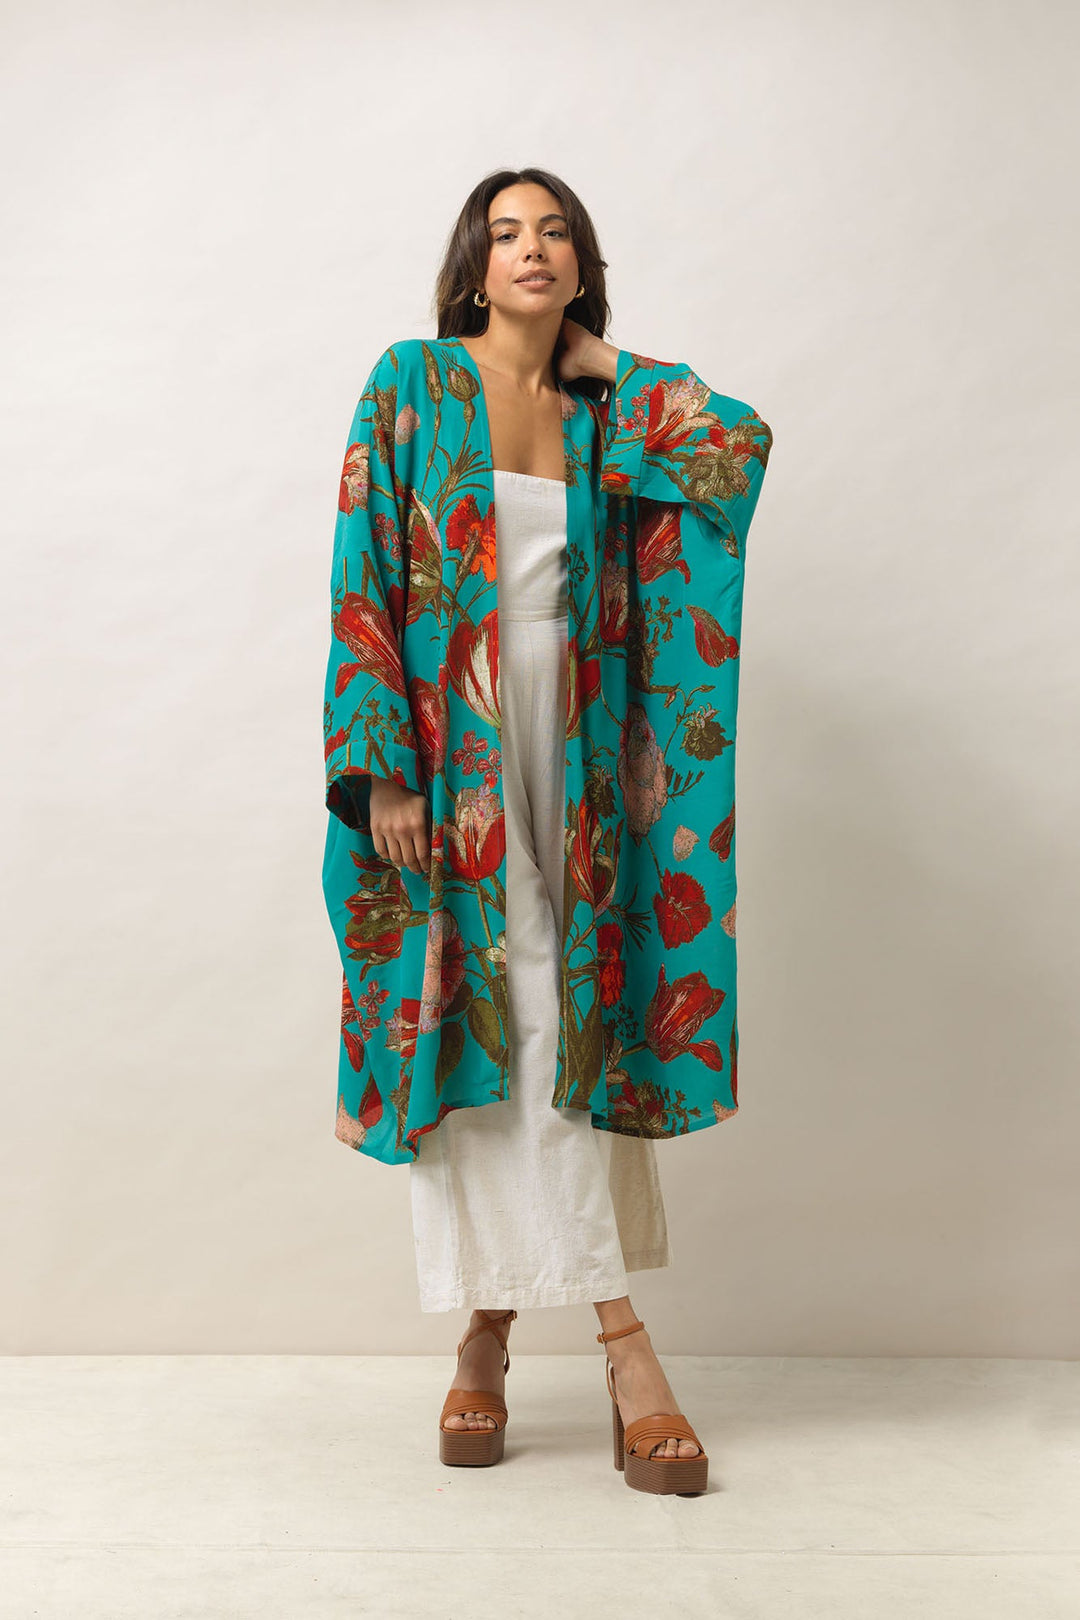 Women's long kimono style jacket in Tulip Blue print by One Hundred Stars